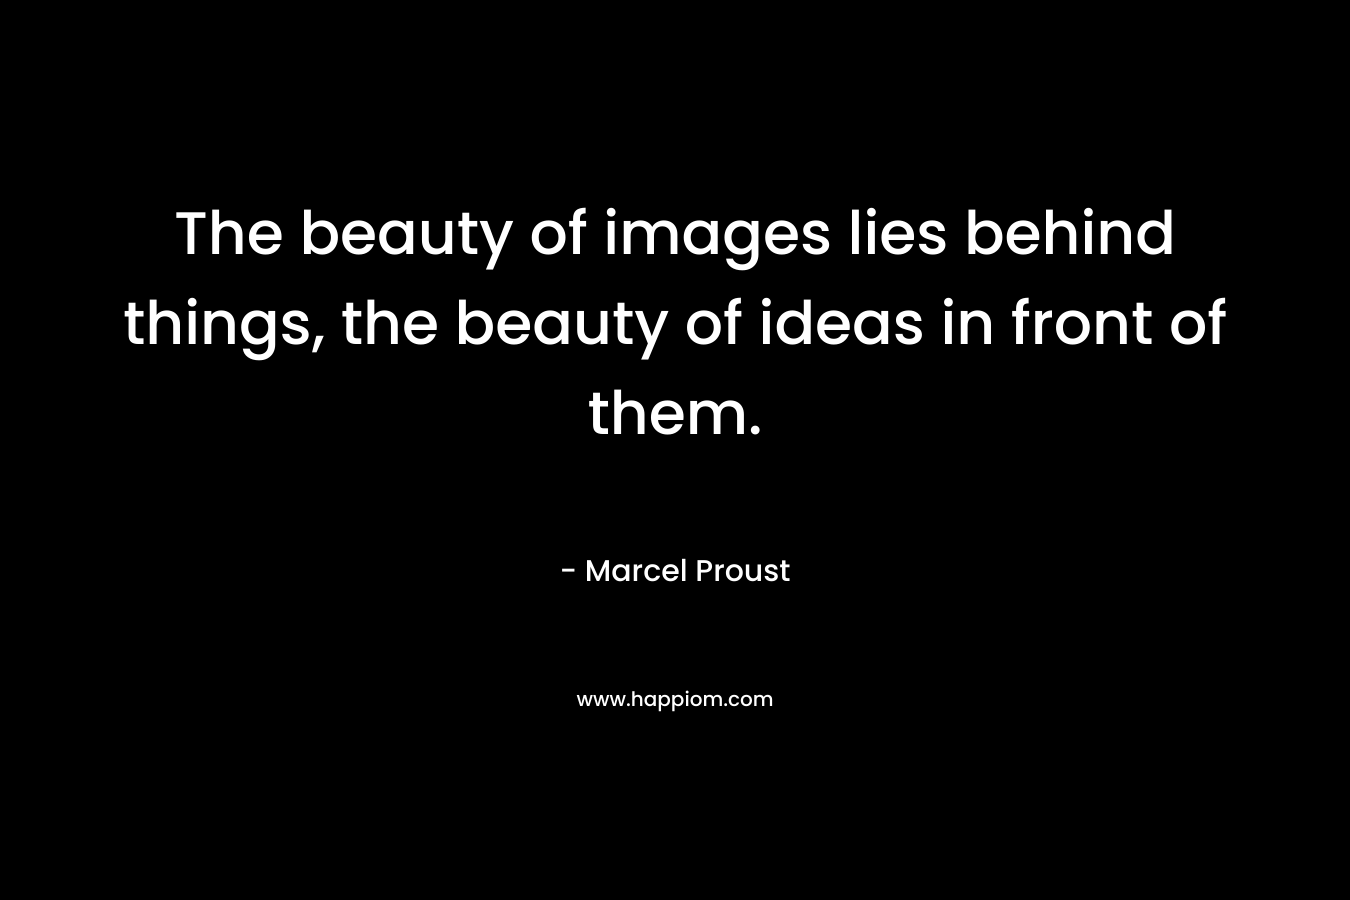 The beauty of images lies behind things, the beauty of ideas in front of them.